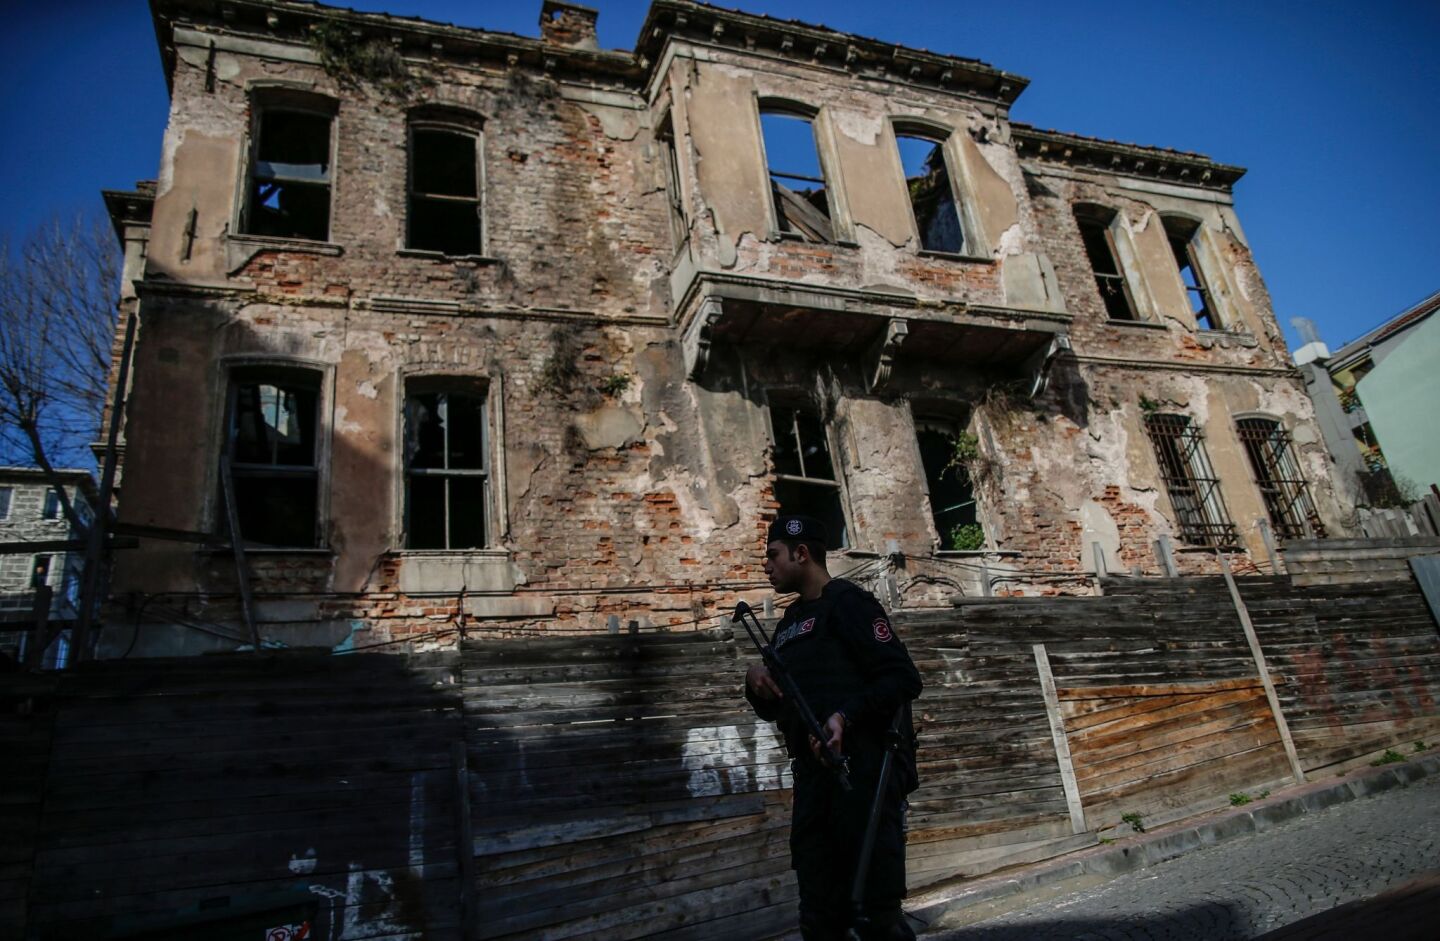 A Turkish police officer patrols past a derelict building in Istanbul's tourist hub of Sultanahmet after a blast killed at least 10 people.